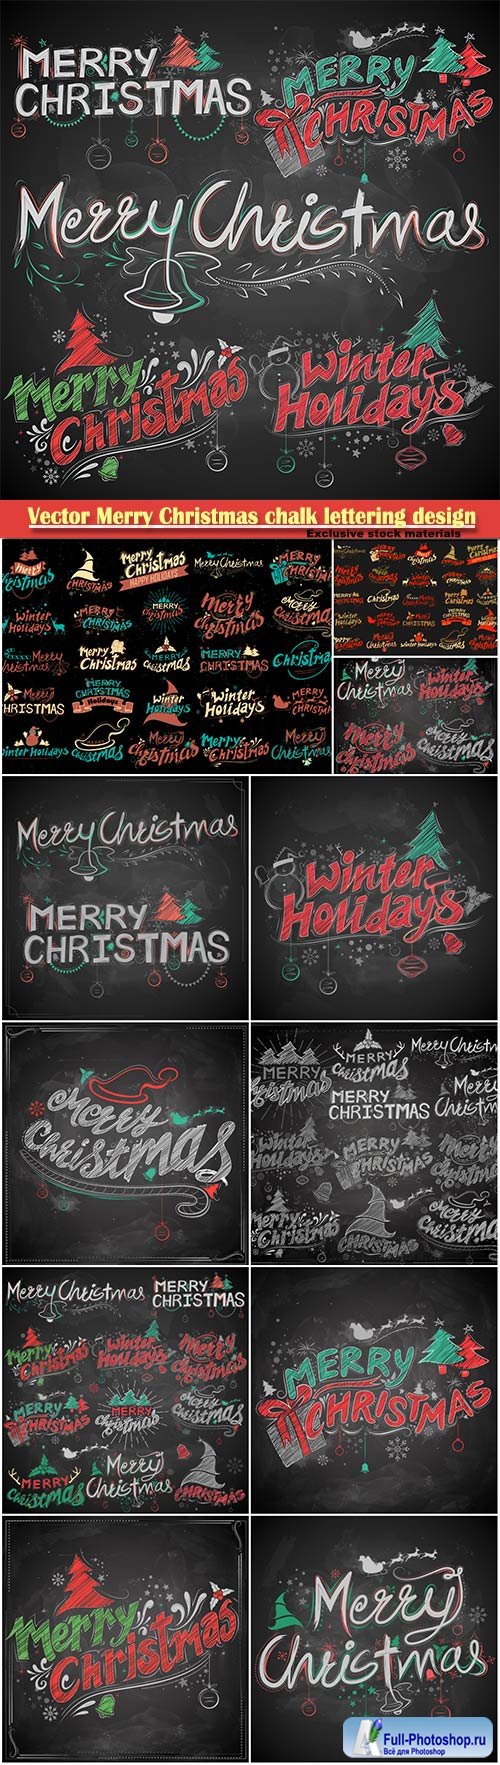 Vector Merry Christmas and winter holiday chalk lettering design